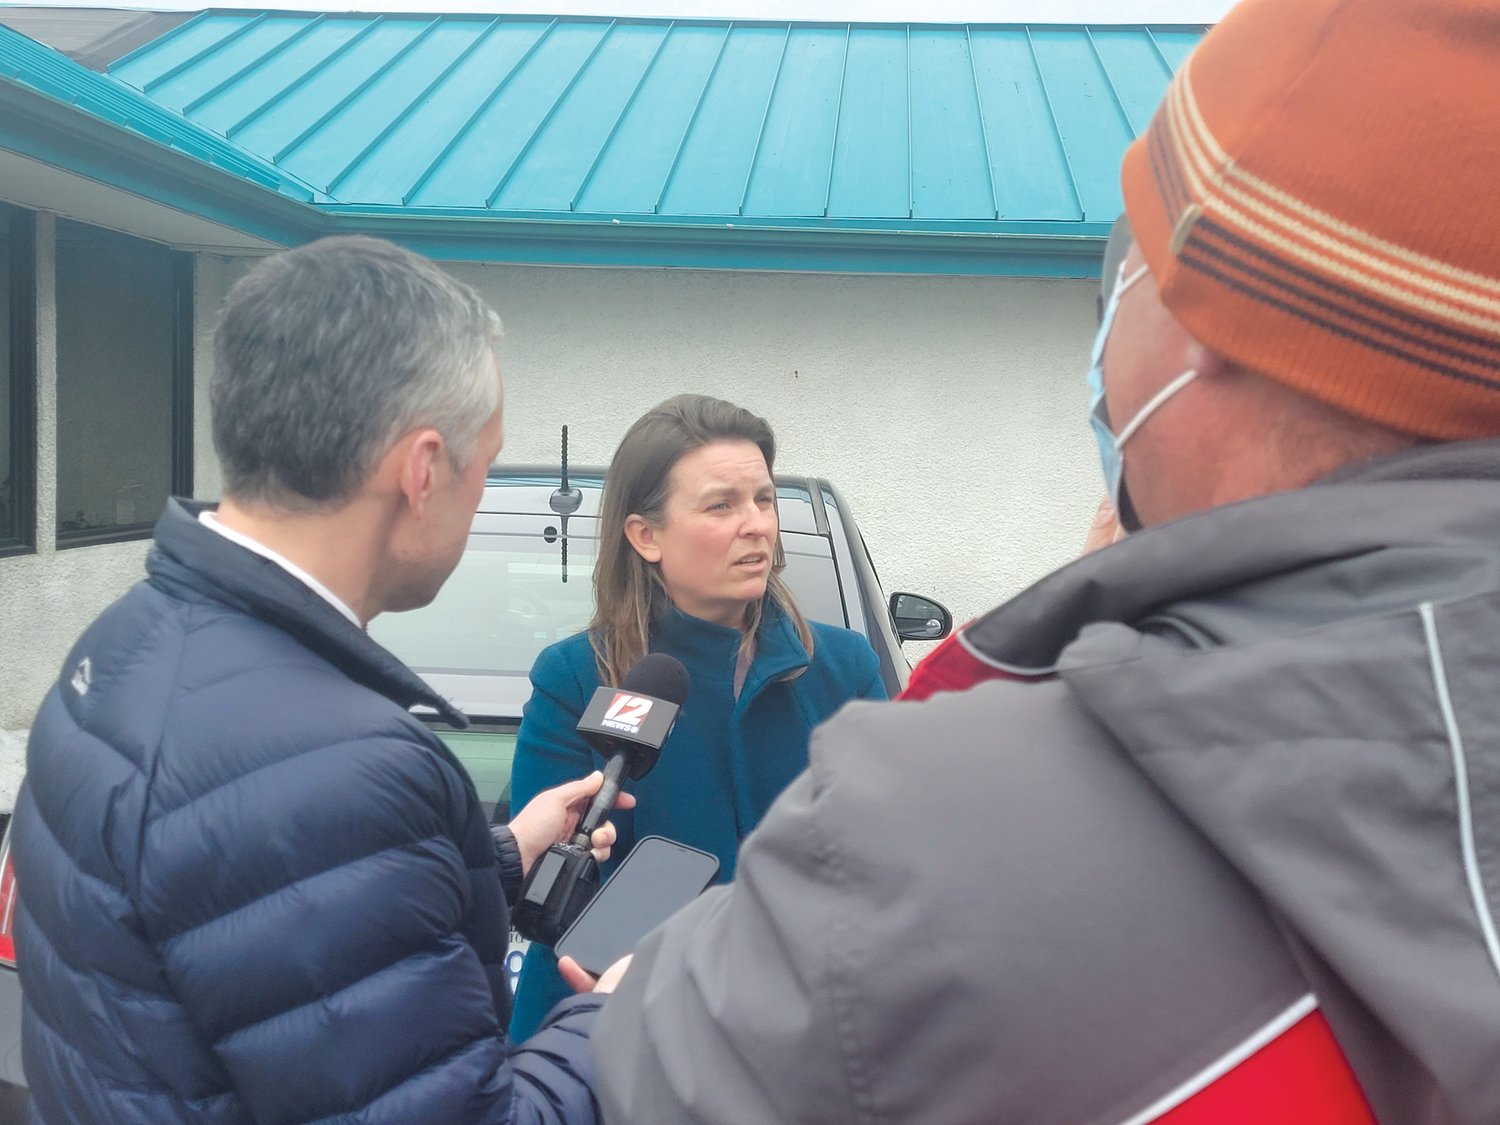 ATWOOD GRILLED. Congressional candidate Joy Fox stopped by the Atwood Grill in Johnston Tuesday afternoon. She fielded questions from local media outside the restaurant 
before entering.